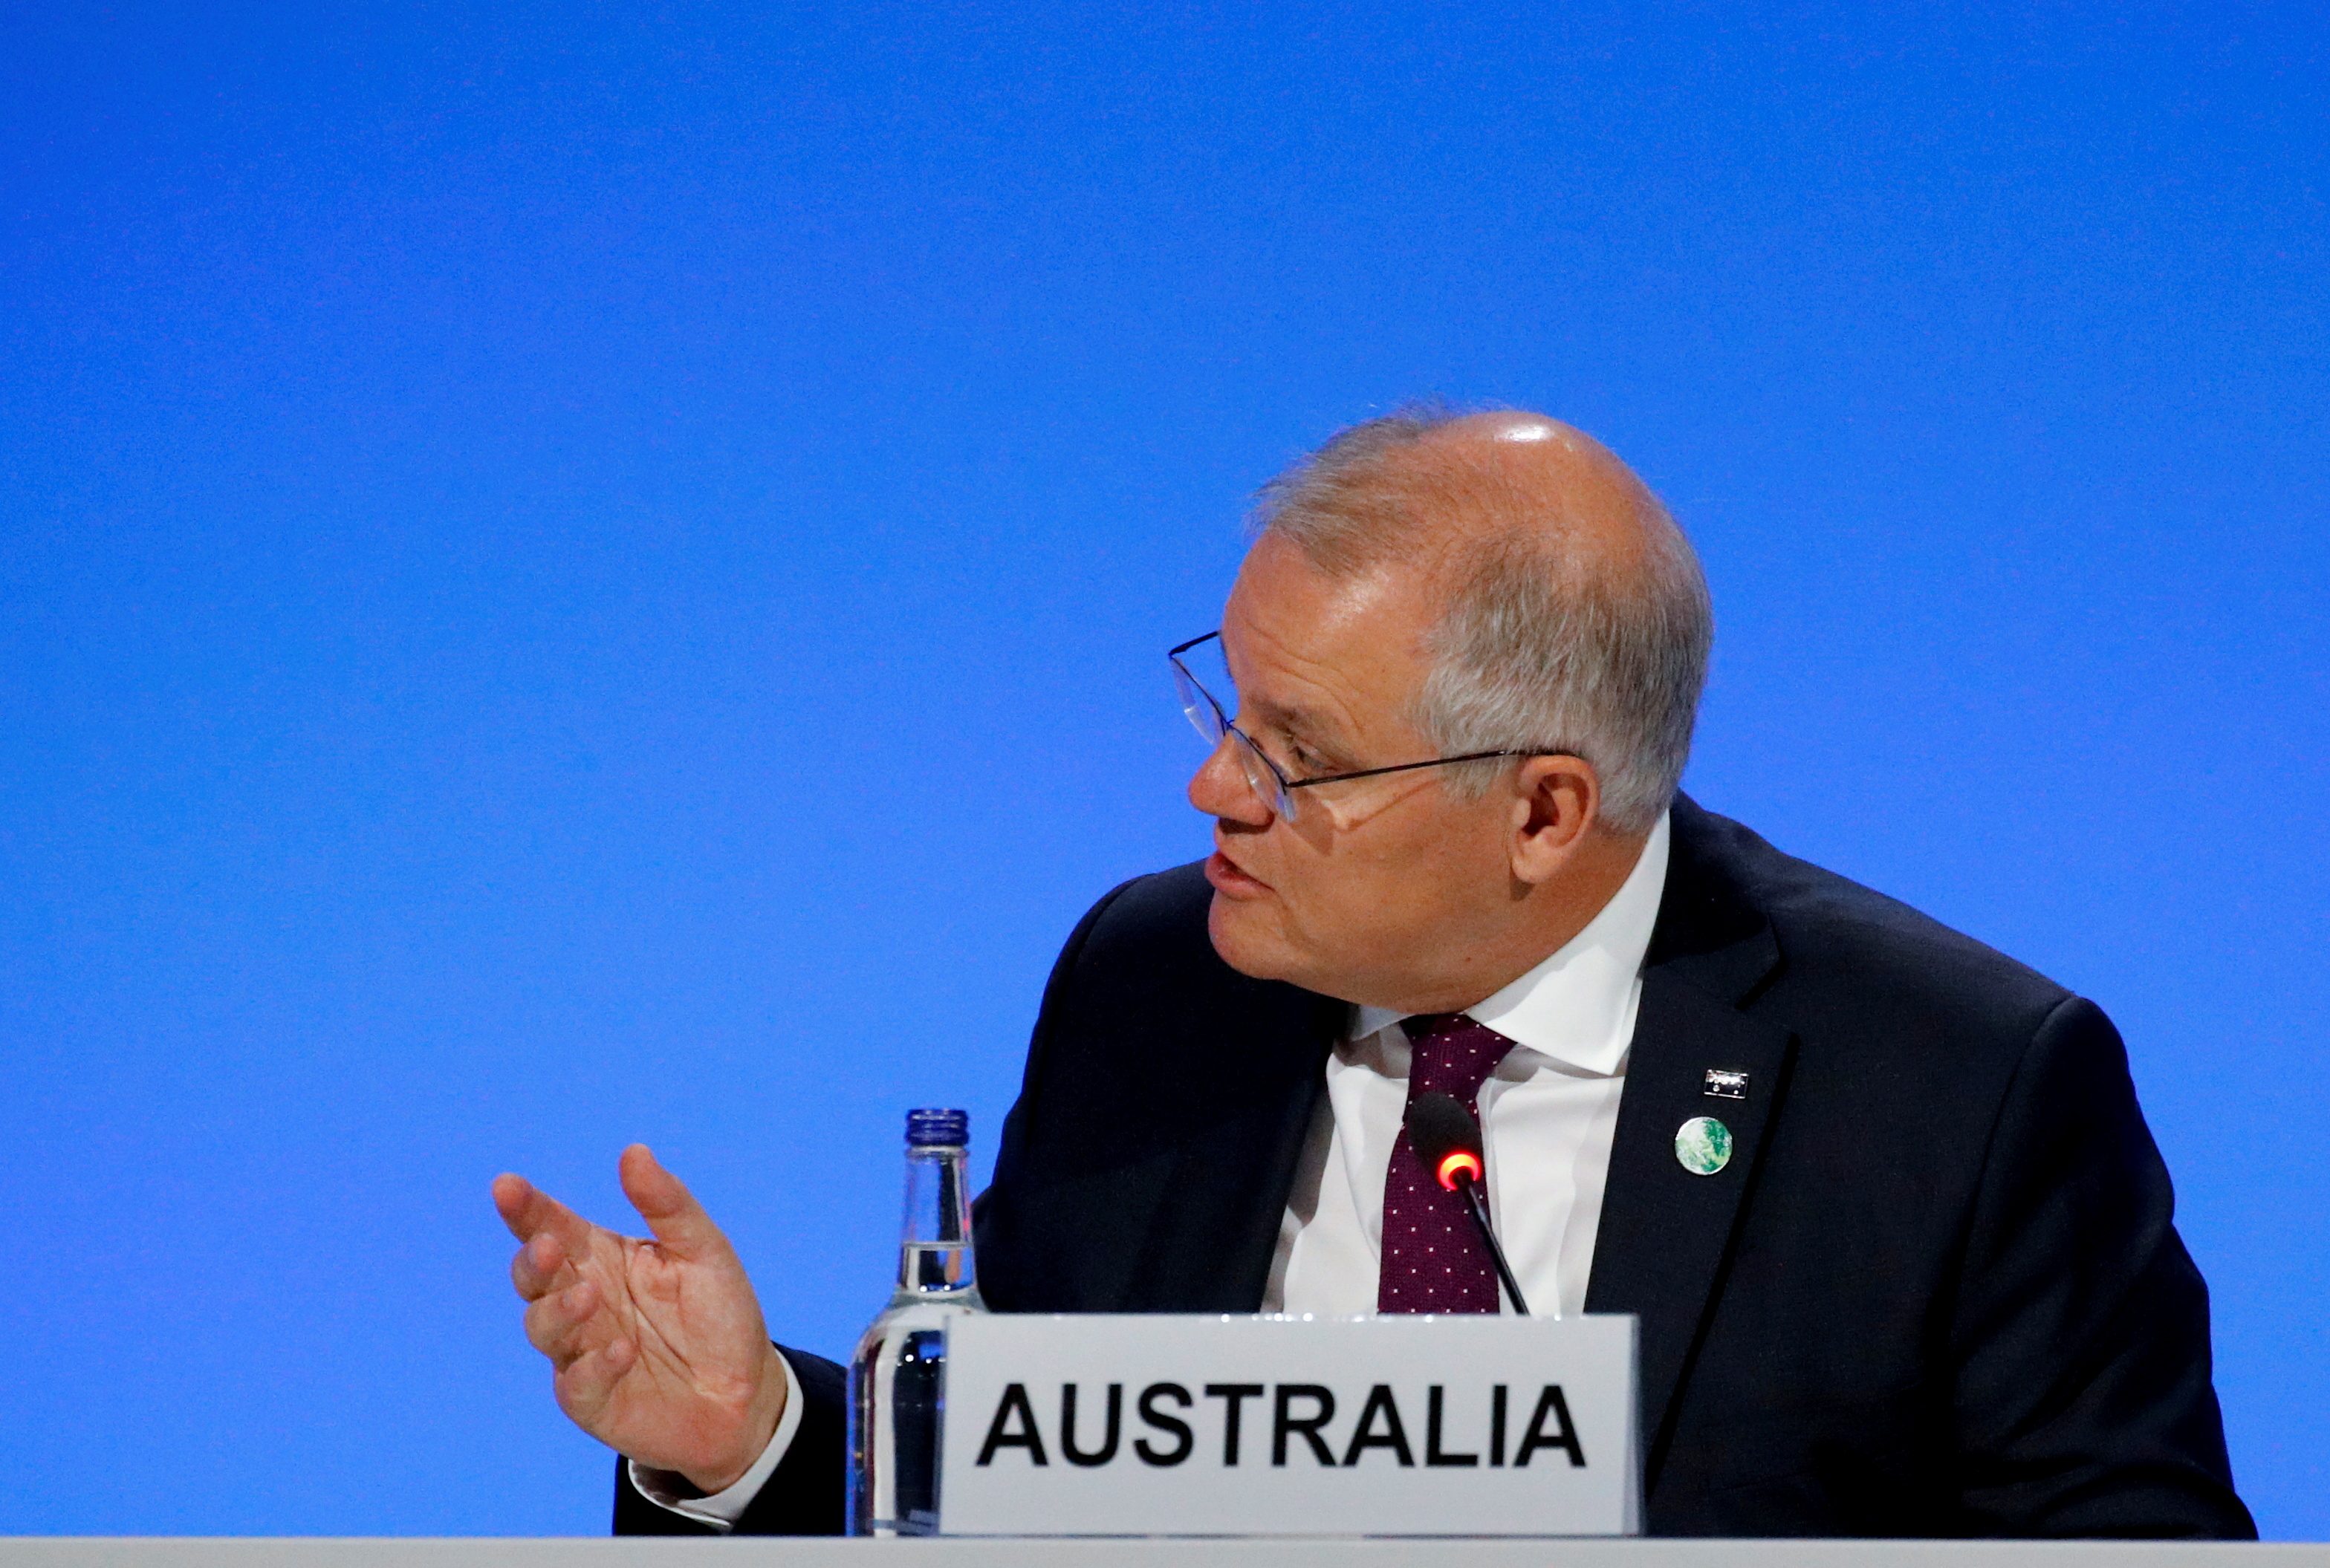 Australia PM, criticized on climate, urges firms to curb costs